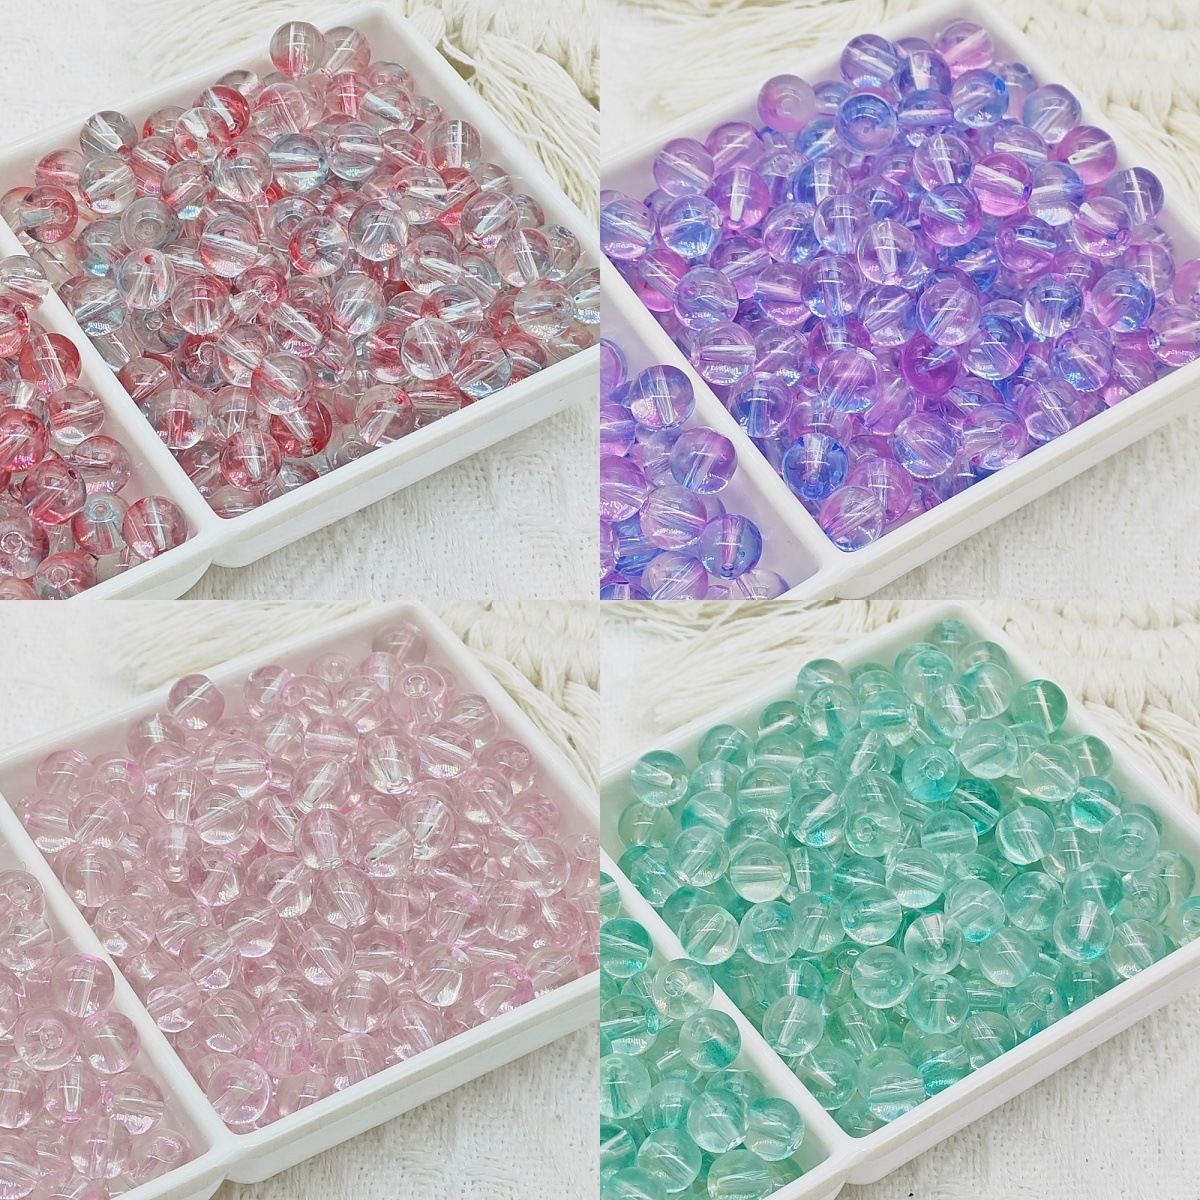 8mm10mm glass beads summer dream jelly double matching round beads colorful loose beads diy beaded jewelry accessories wholesale